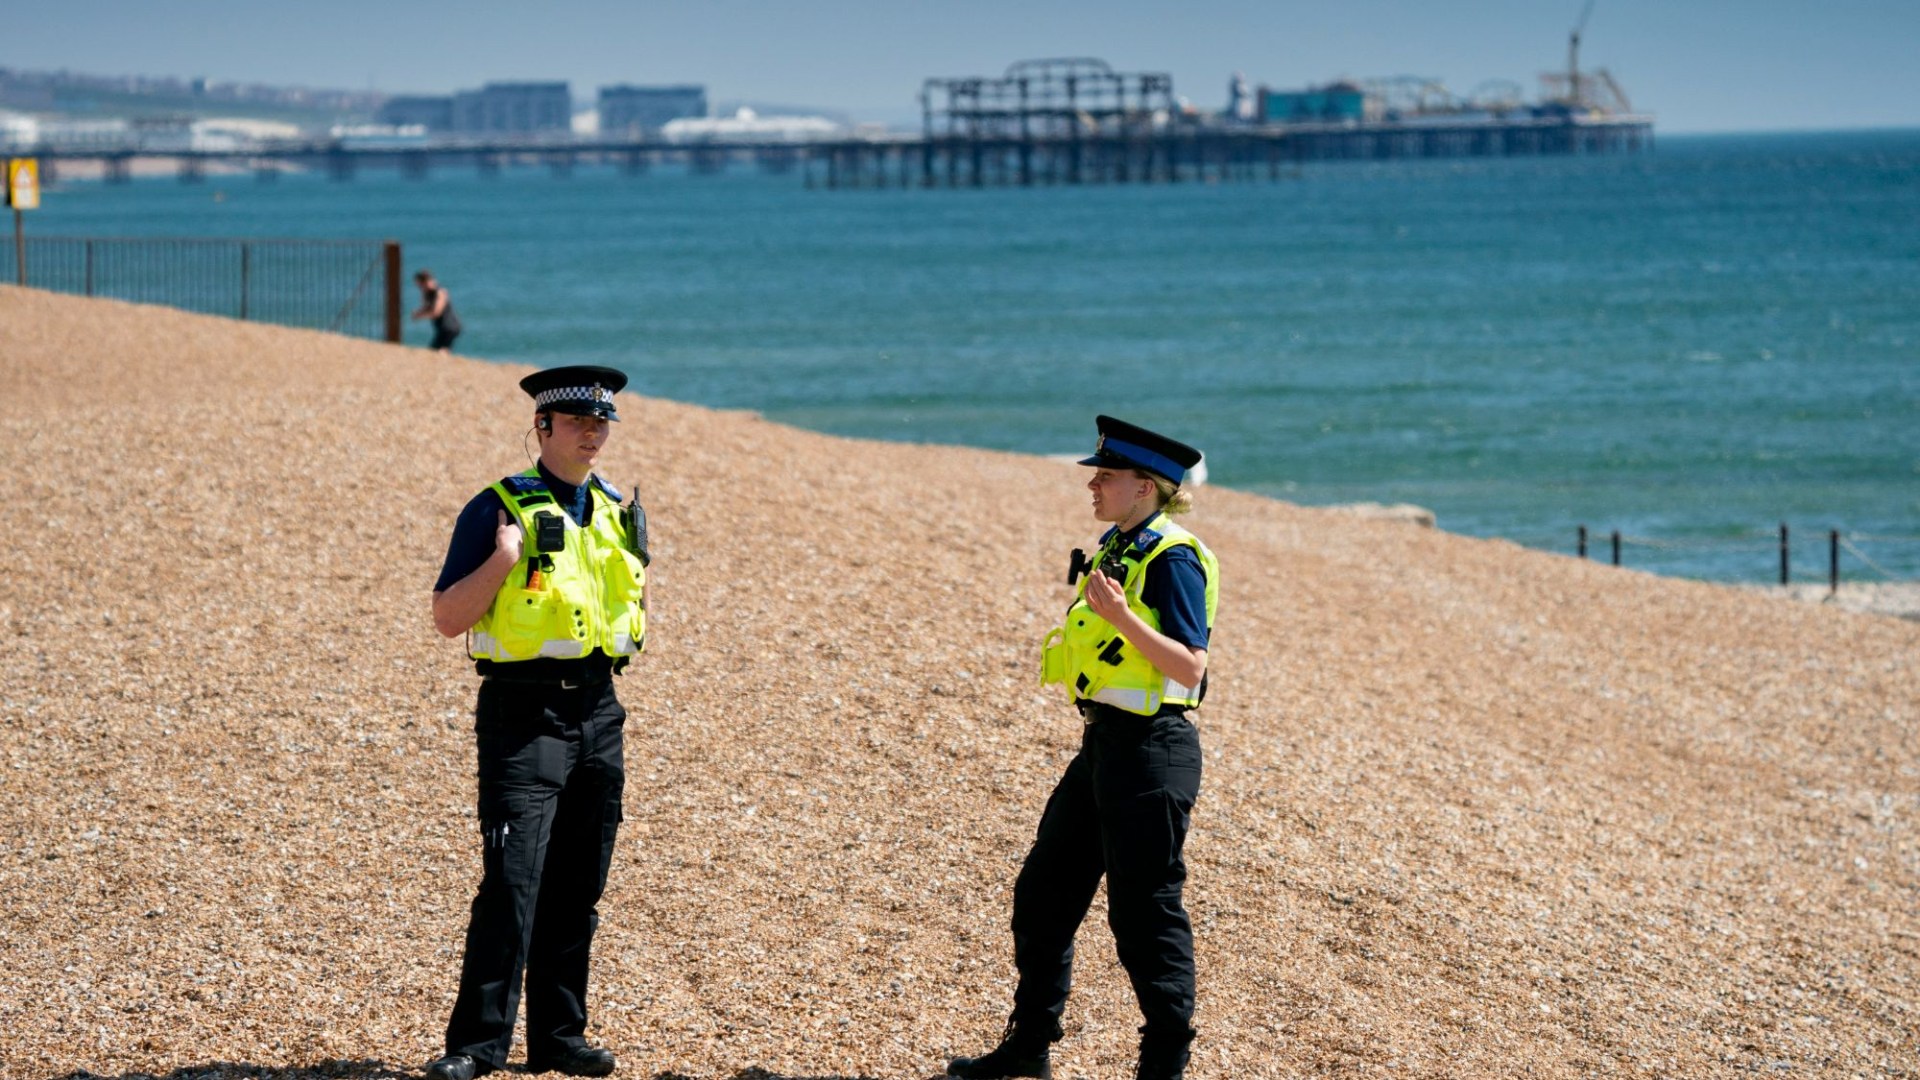 Horror as woman is sexually assaulted at popular beach after being approached by stranger who asked her to go for a swim